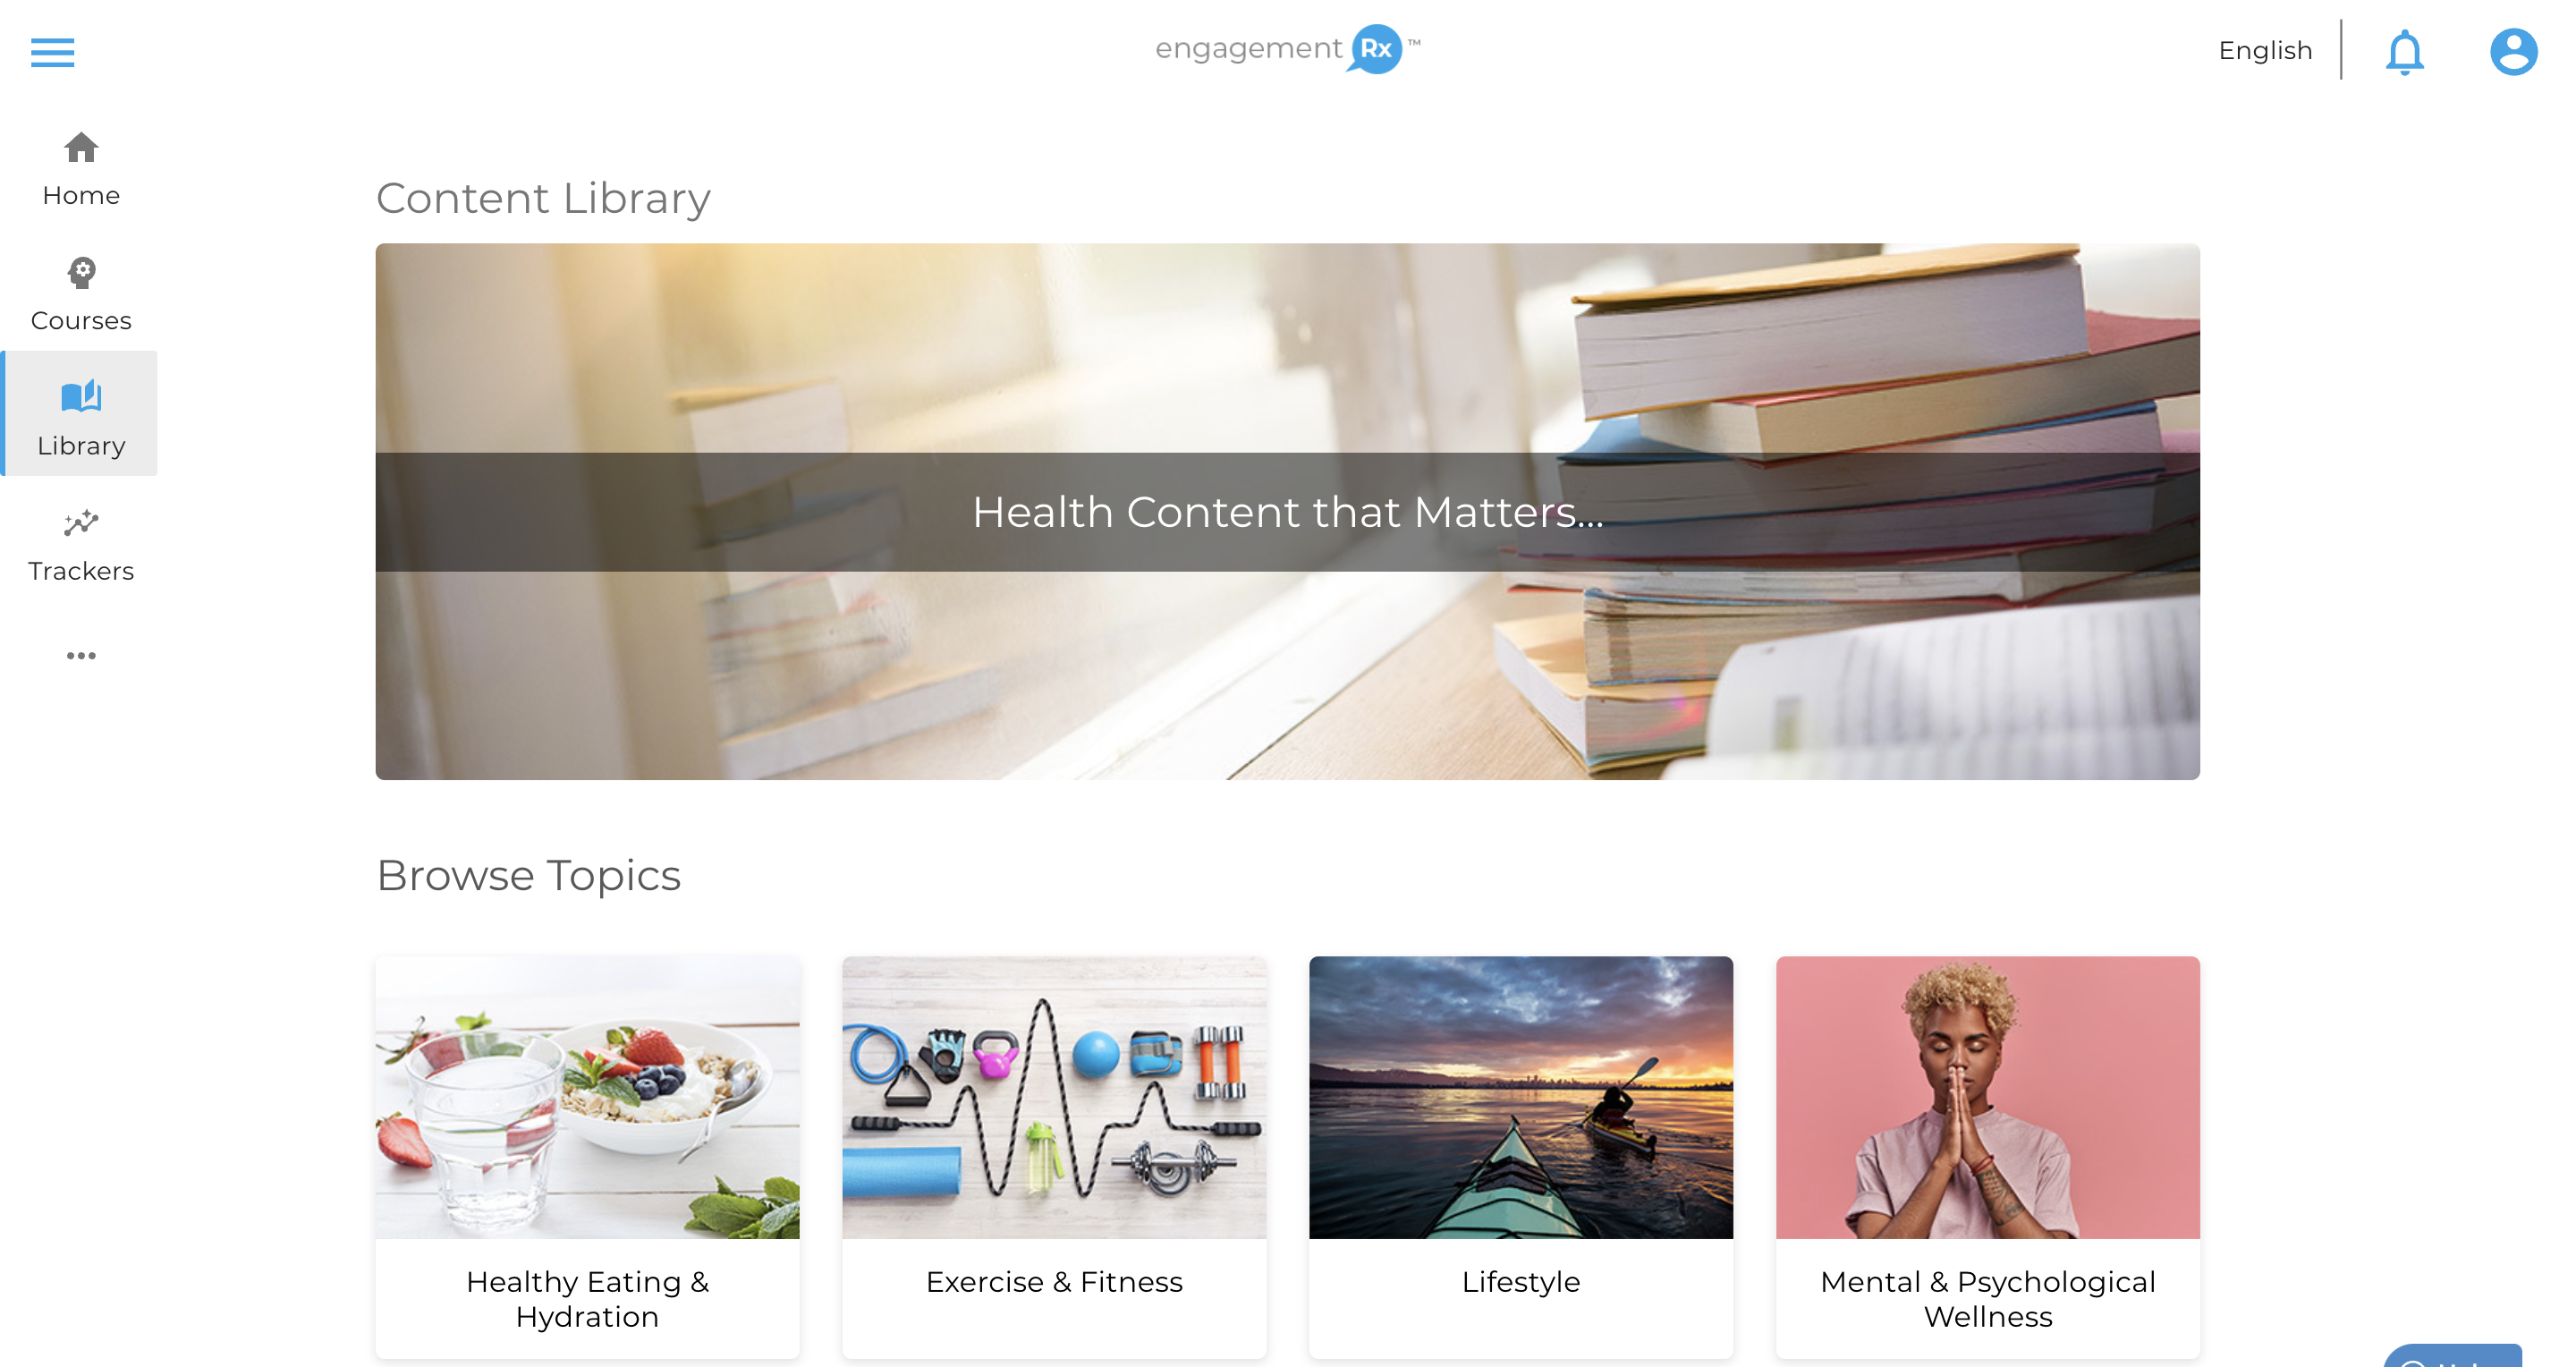 Access our articles, guides, and videos which offer perspective and education with important insights from experts and specialists. Quickly share these with your participants to help them on their health journey.